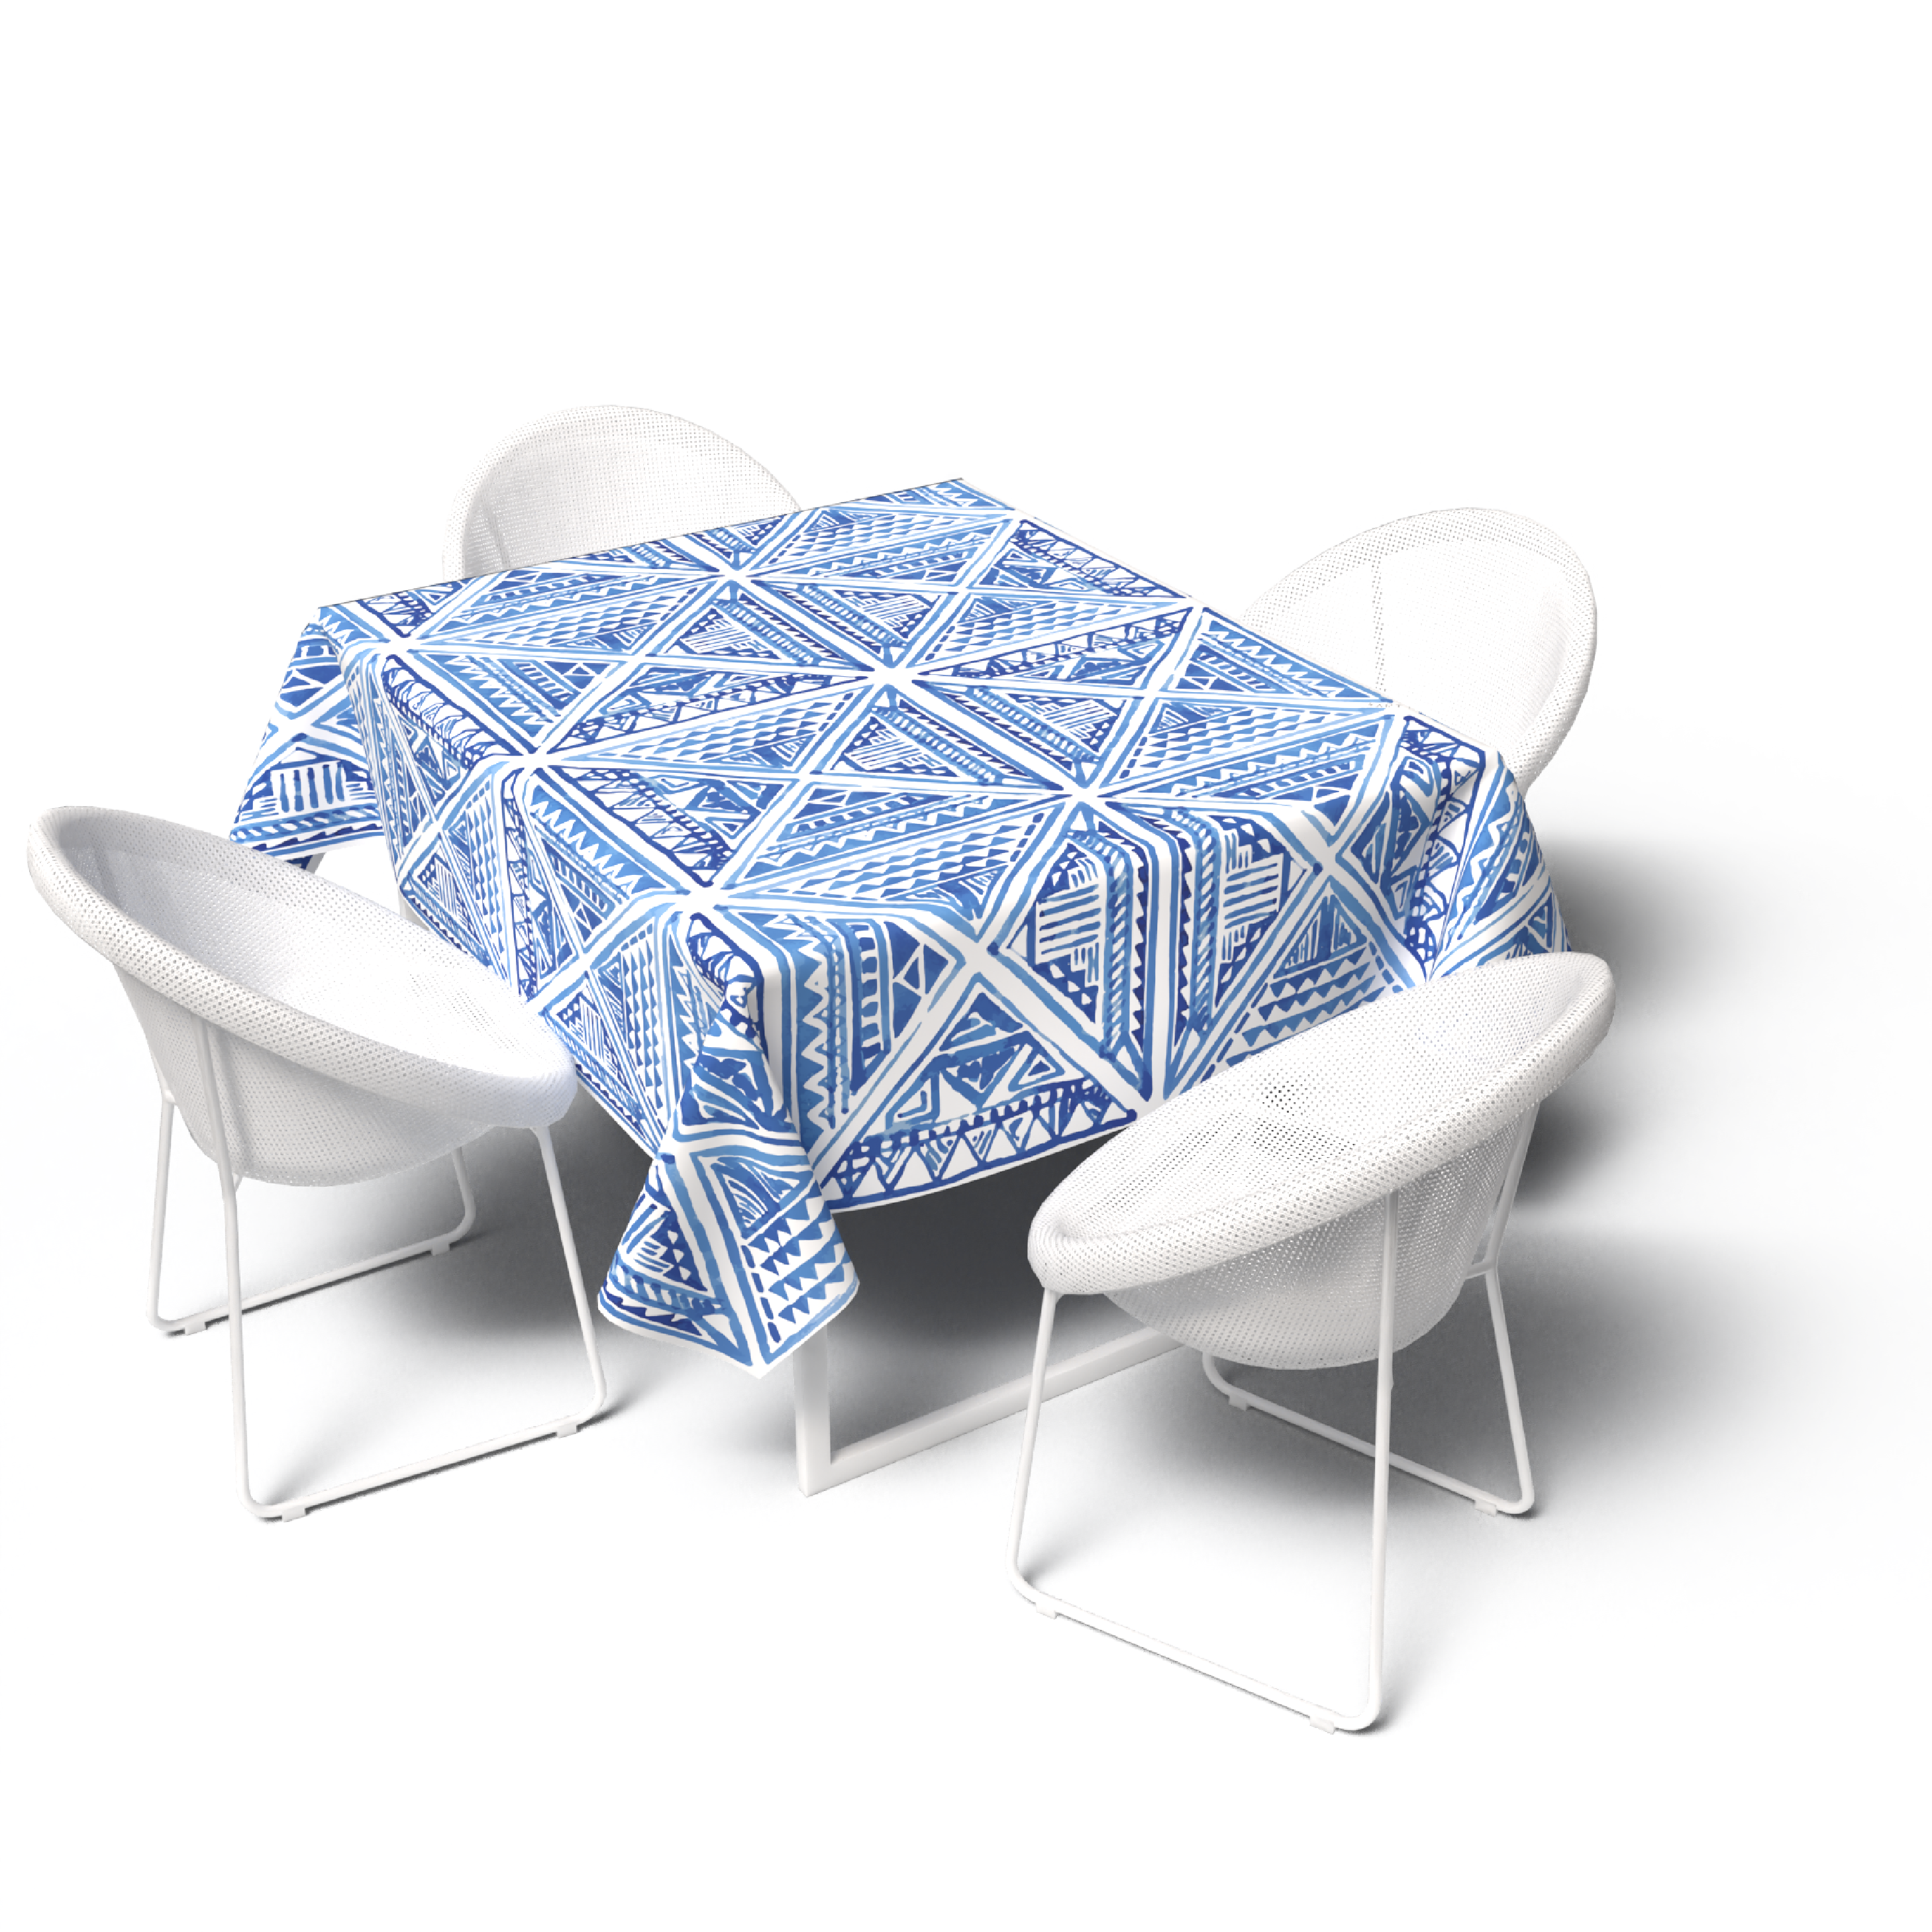 Glam Tablecloth